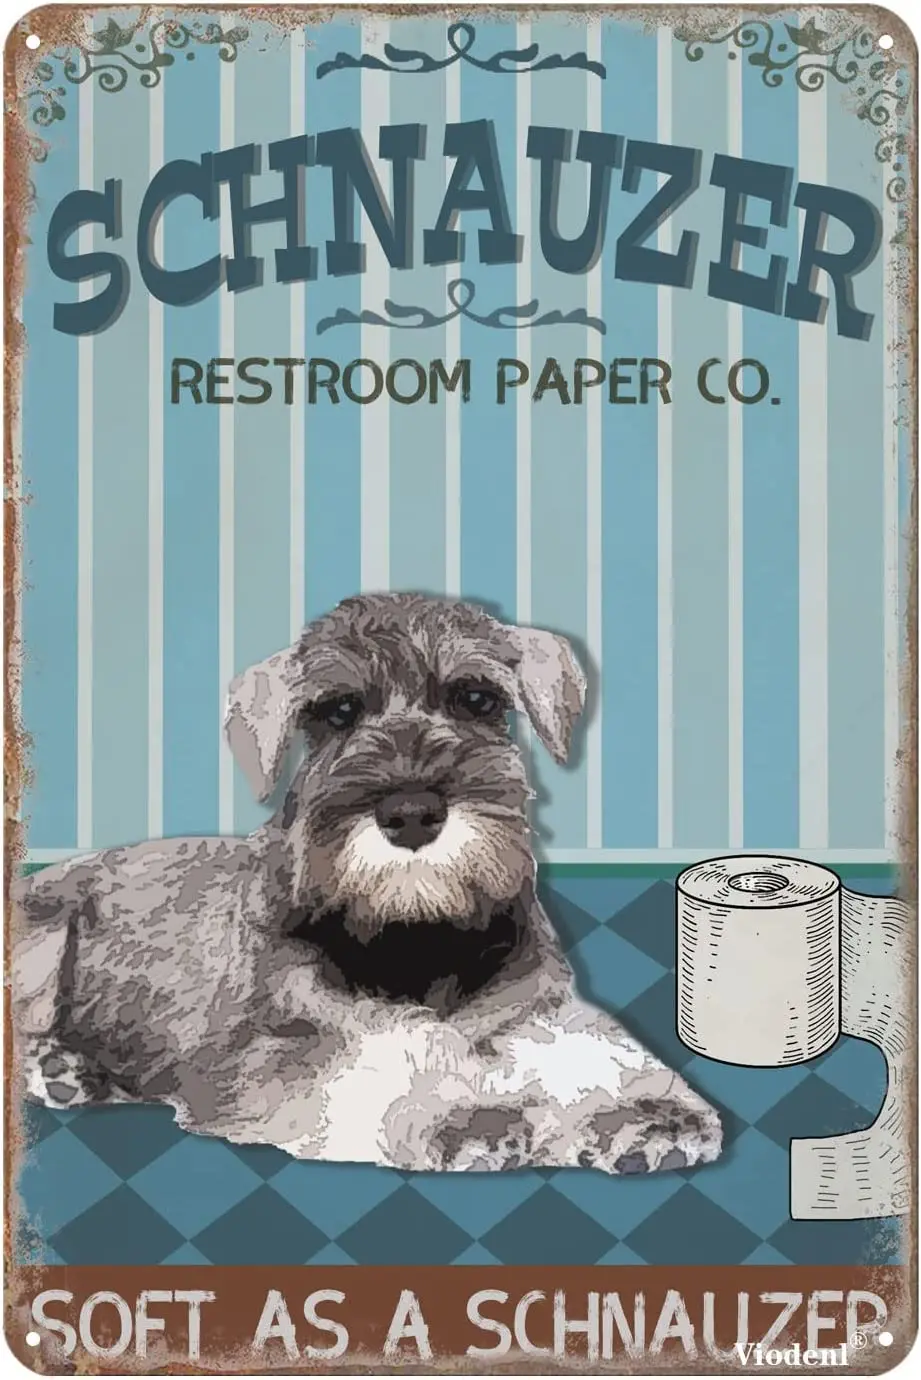 

Vintage Tin Signs Schnauzer Restroom Paper Co. Art Sign Home Kitchen Bar Cafe Club Cave Wall Decor Metal Sign 12x8